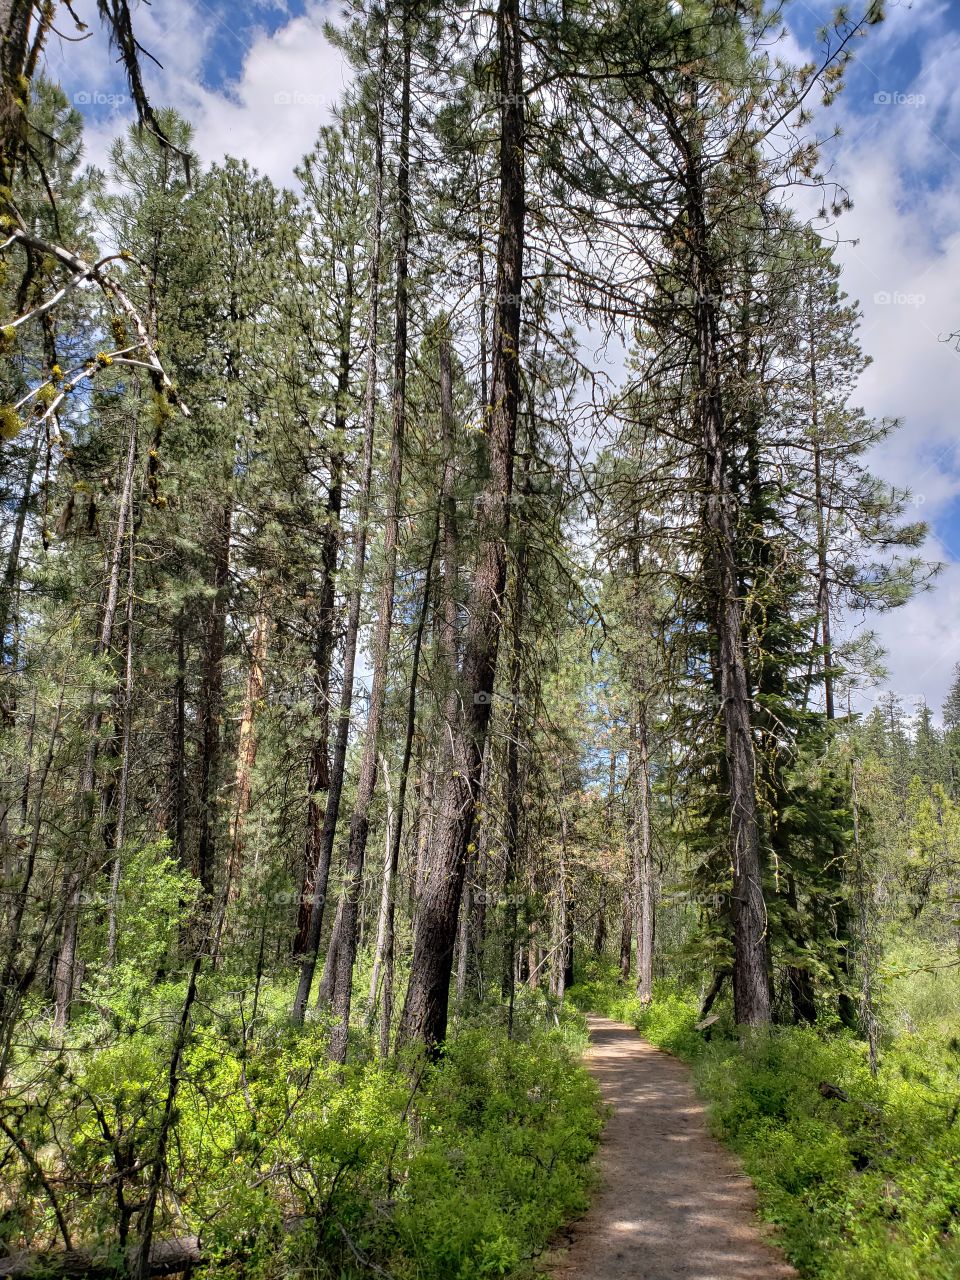 A dirt path leads through the lush green forest floor and towering pine trees in the Deschutes National Forest in Central Oregon on a sunny summer day.